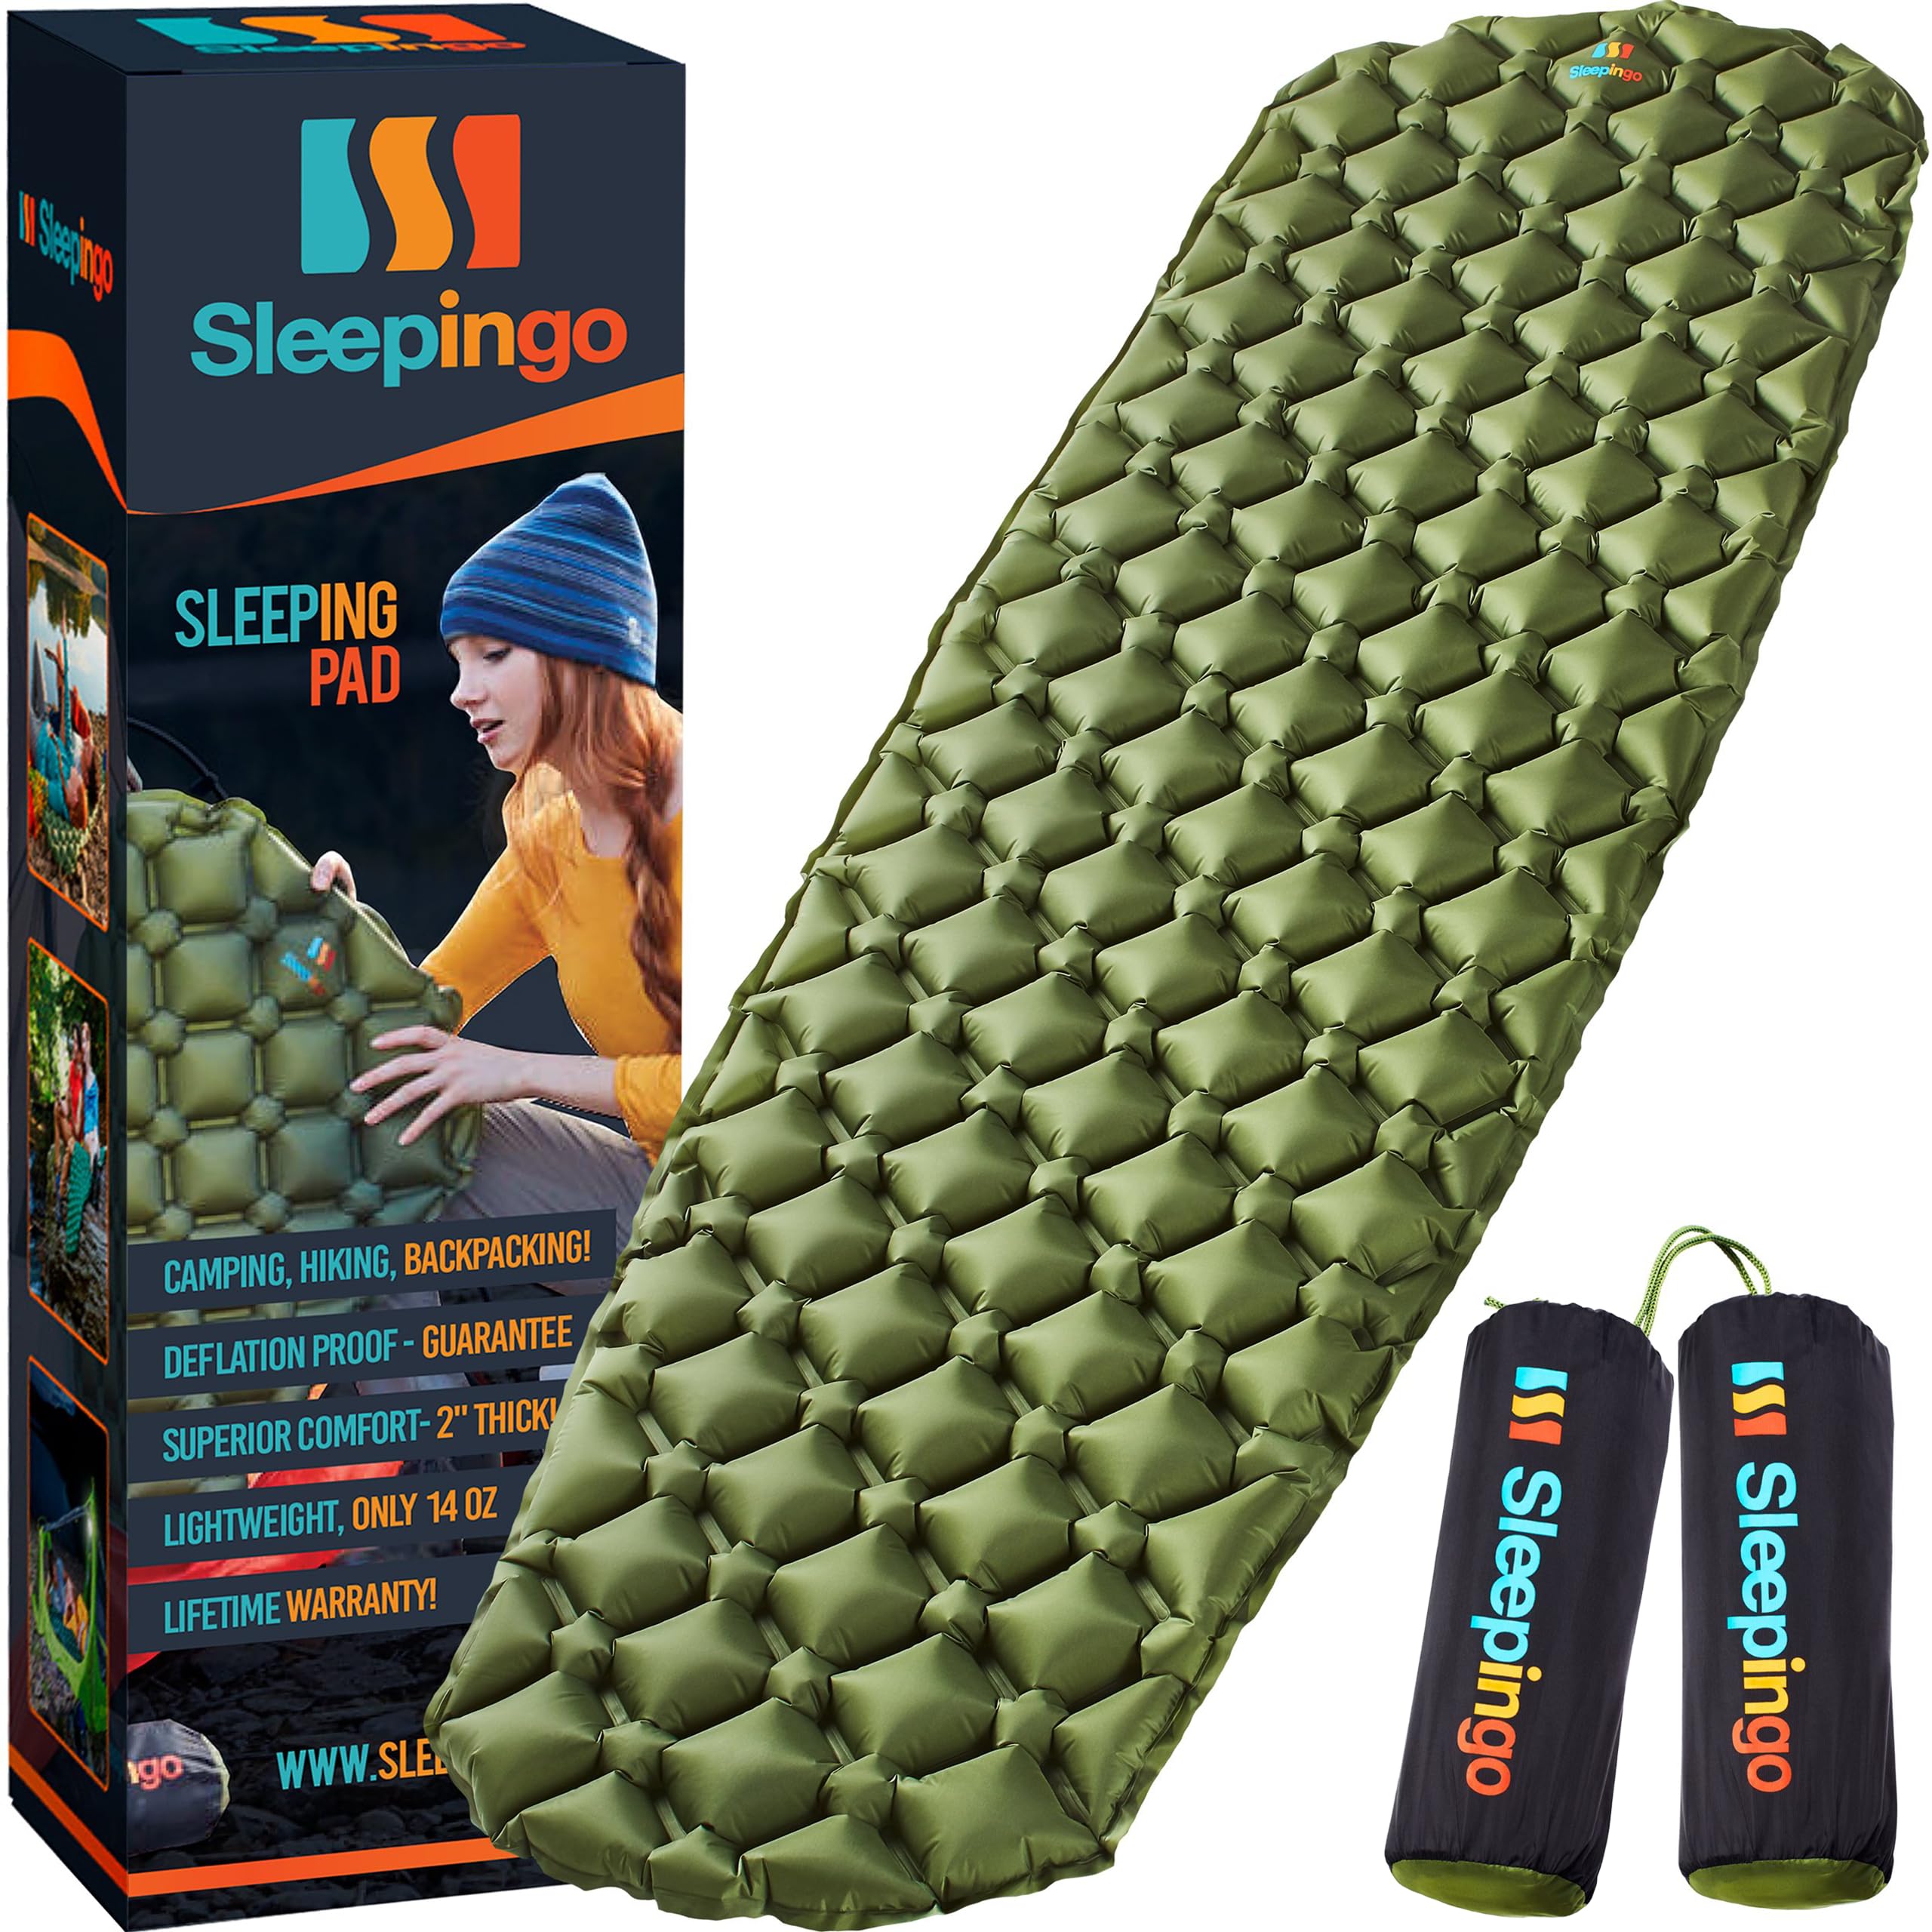 Sleepingo Large Sleeping Pad for Camping - Ultralight Sleeping Mat for Camping, Backpacking, Hiking - Lightweight, Inflatable & Compact Camping Air Mattress - Backpacking Sleeping Pad - Sleep Pad, 2pk  - Like New